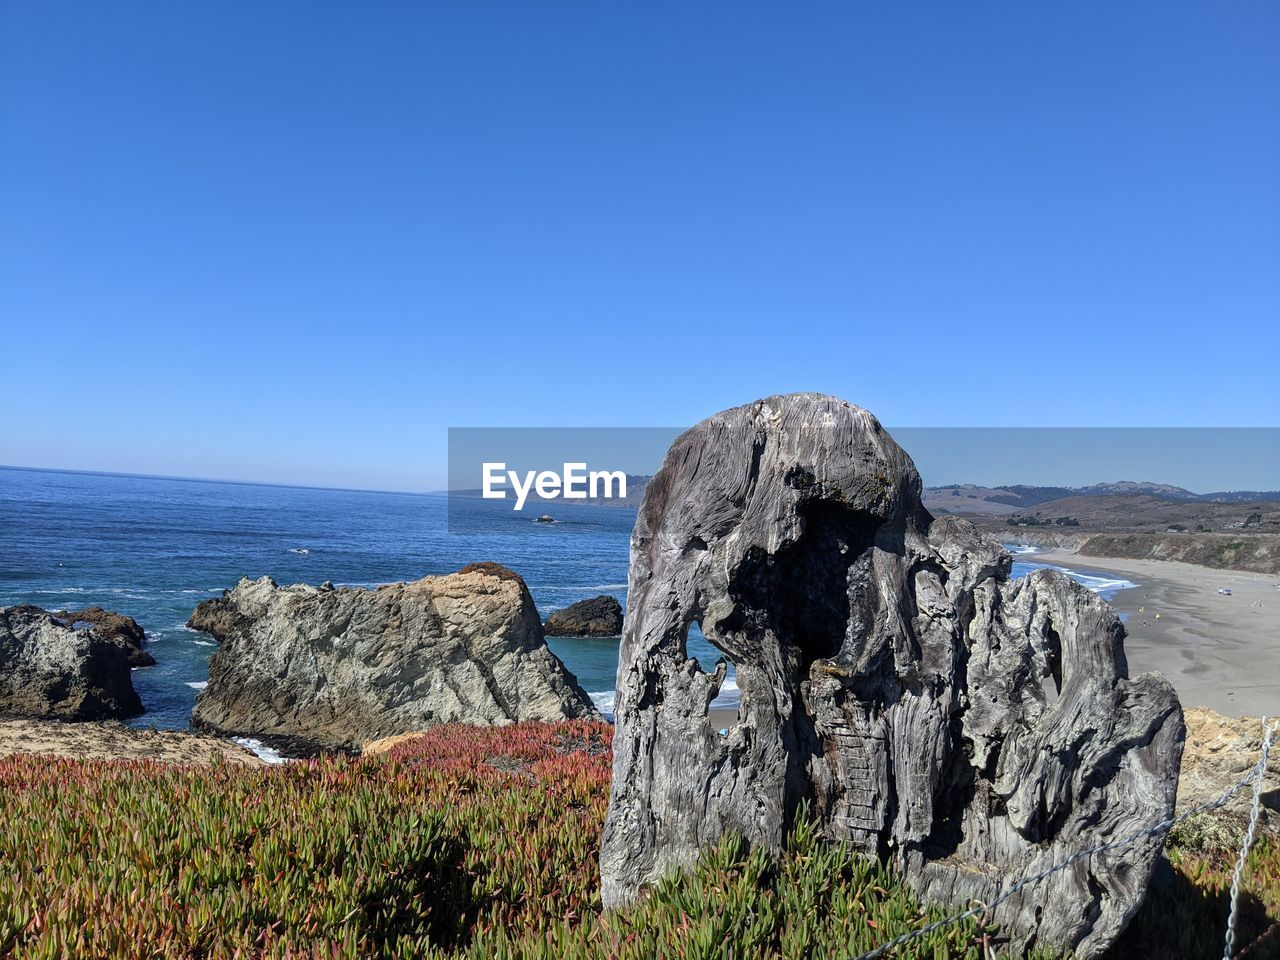 SCENIC VIEW OF ROCK FORMATION AGAINST CLEAR BLUE SKY